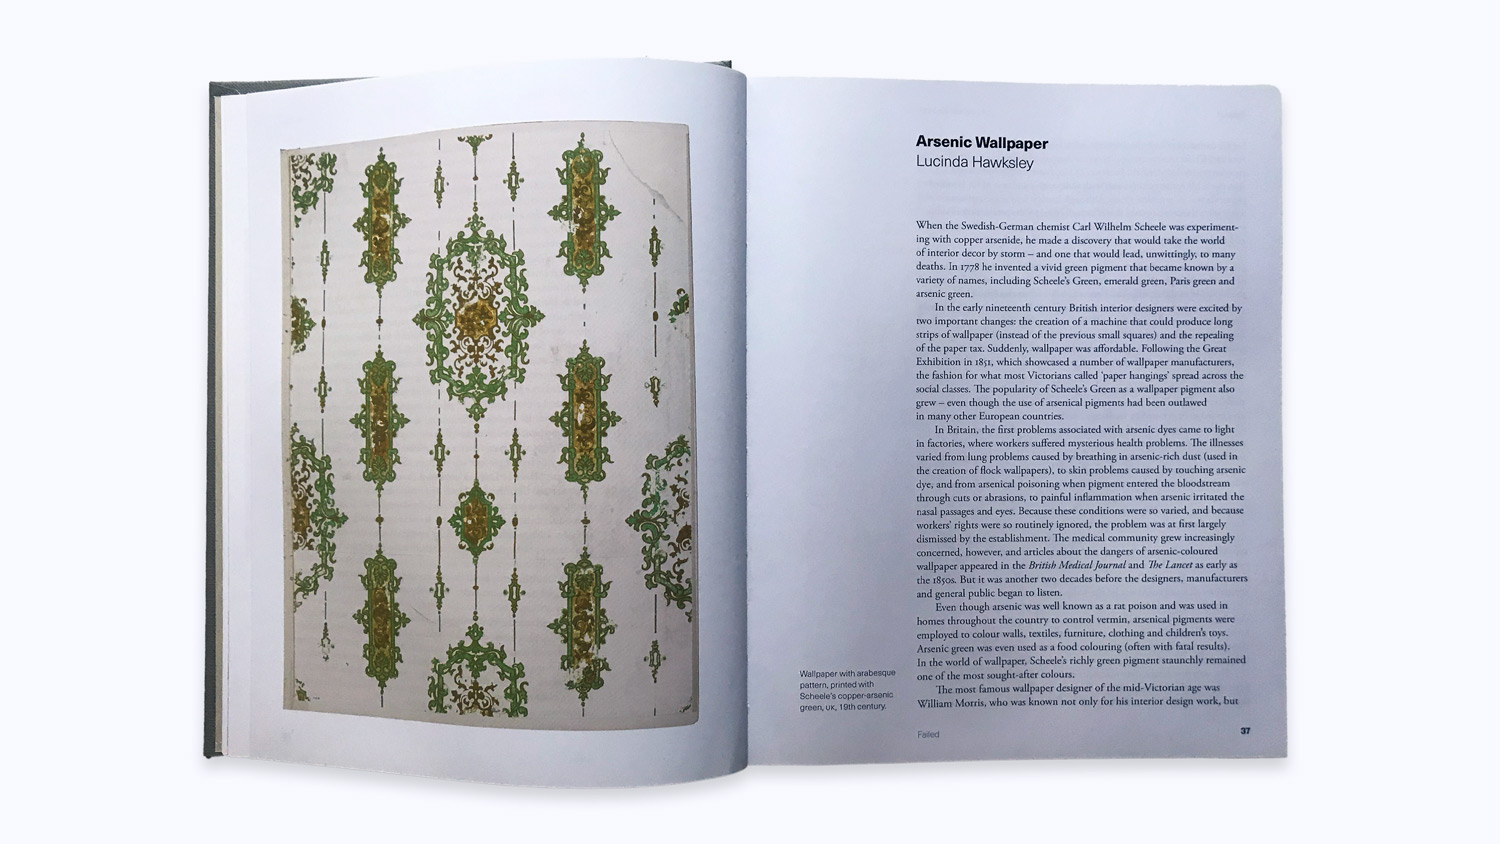 A spread from Extinct: A Compendium of Obsolete Objects shows a photo of a patterned arsenic-laced wallpaper